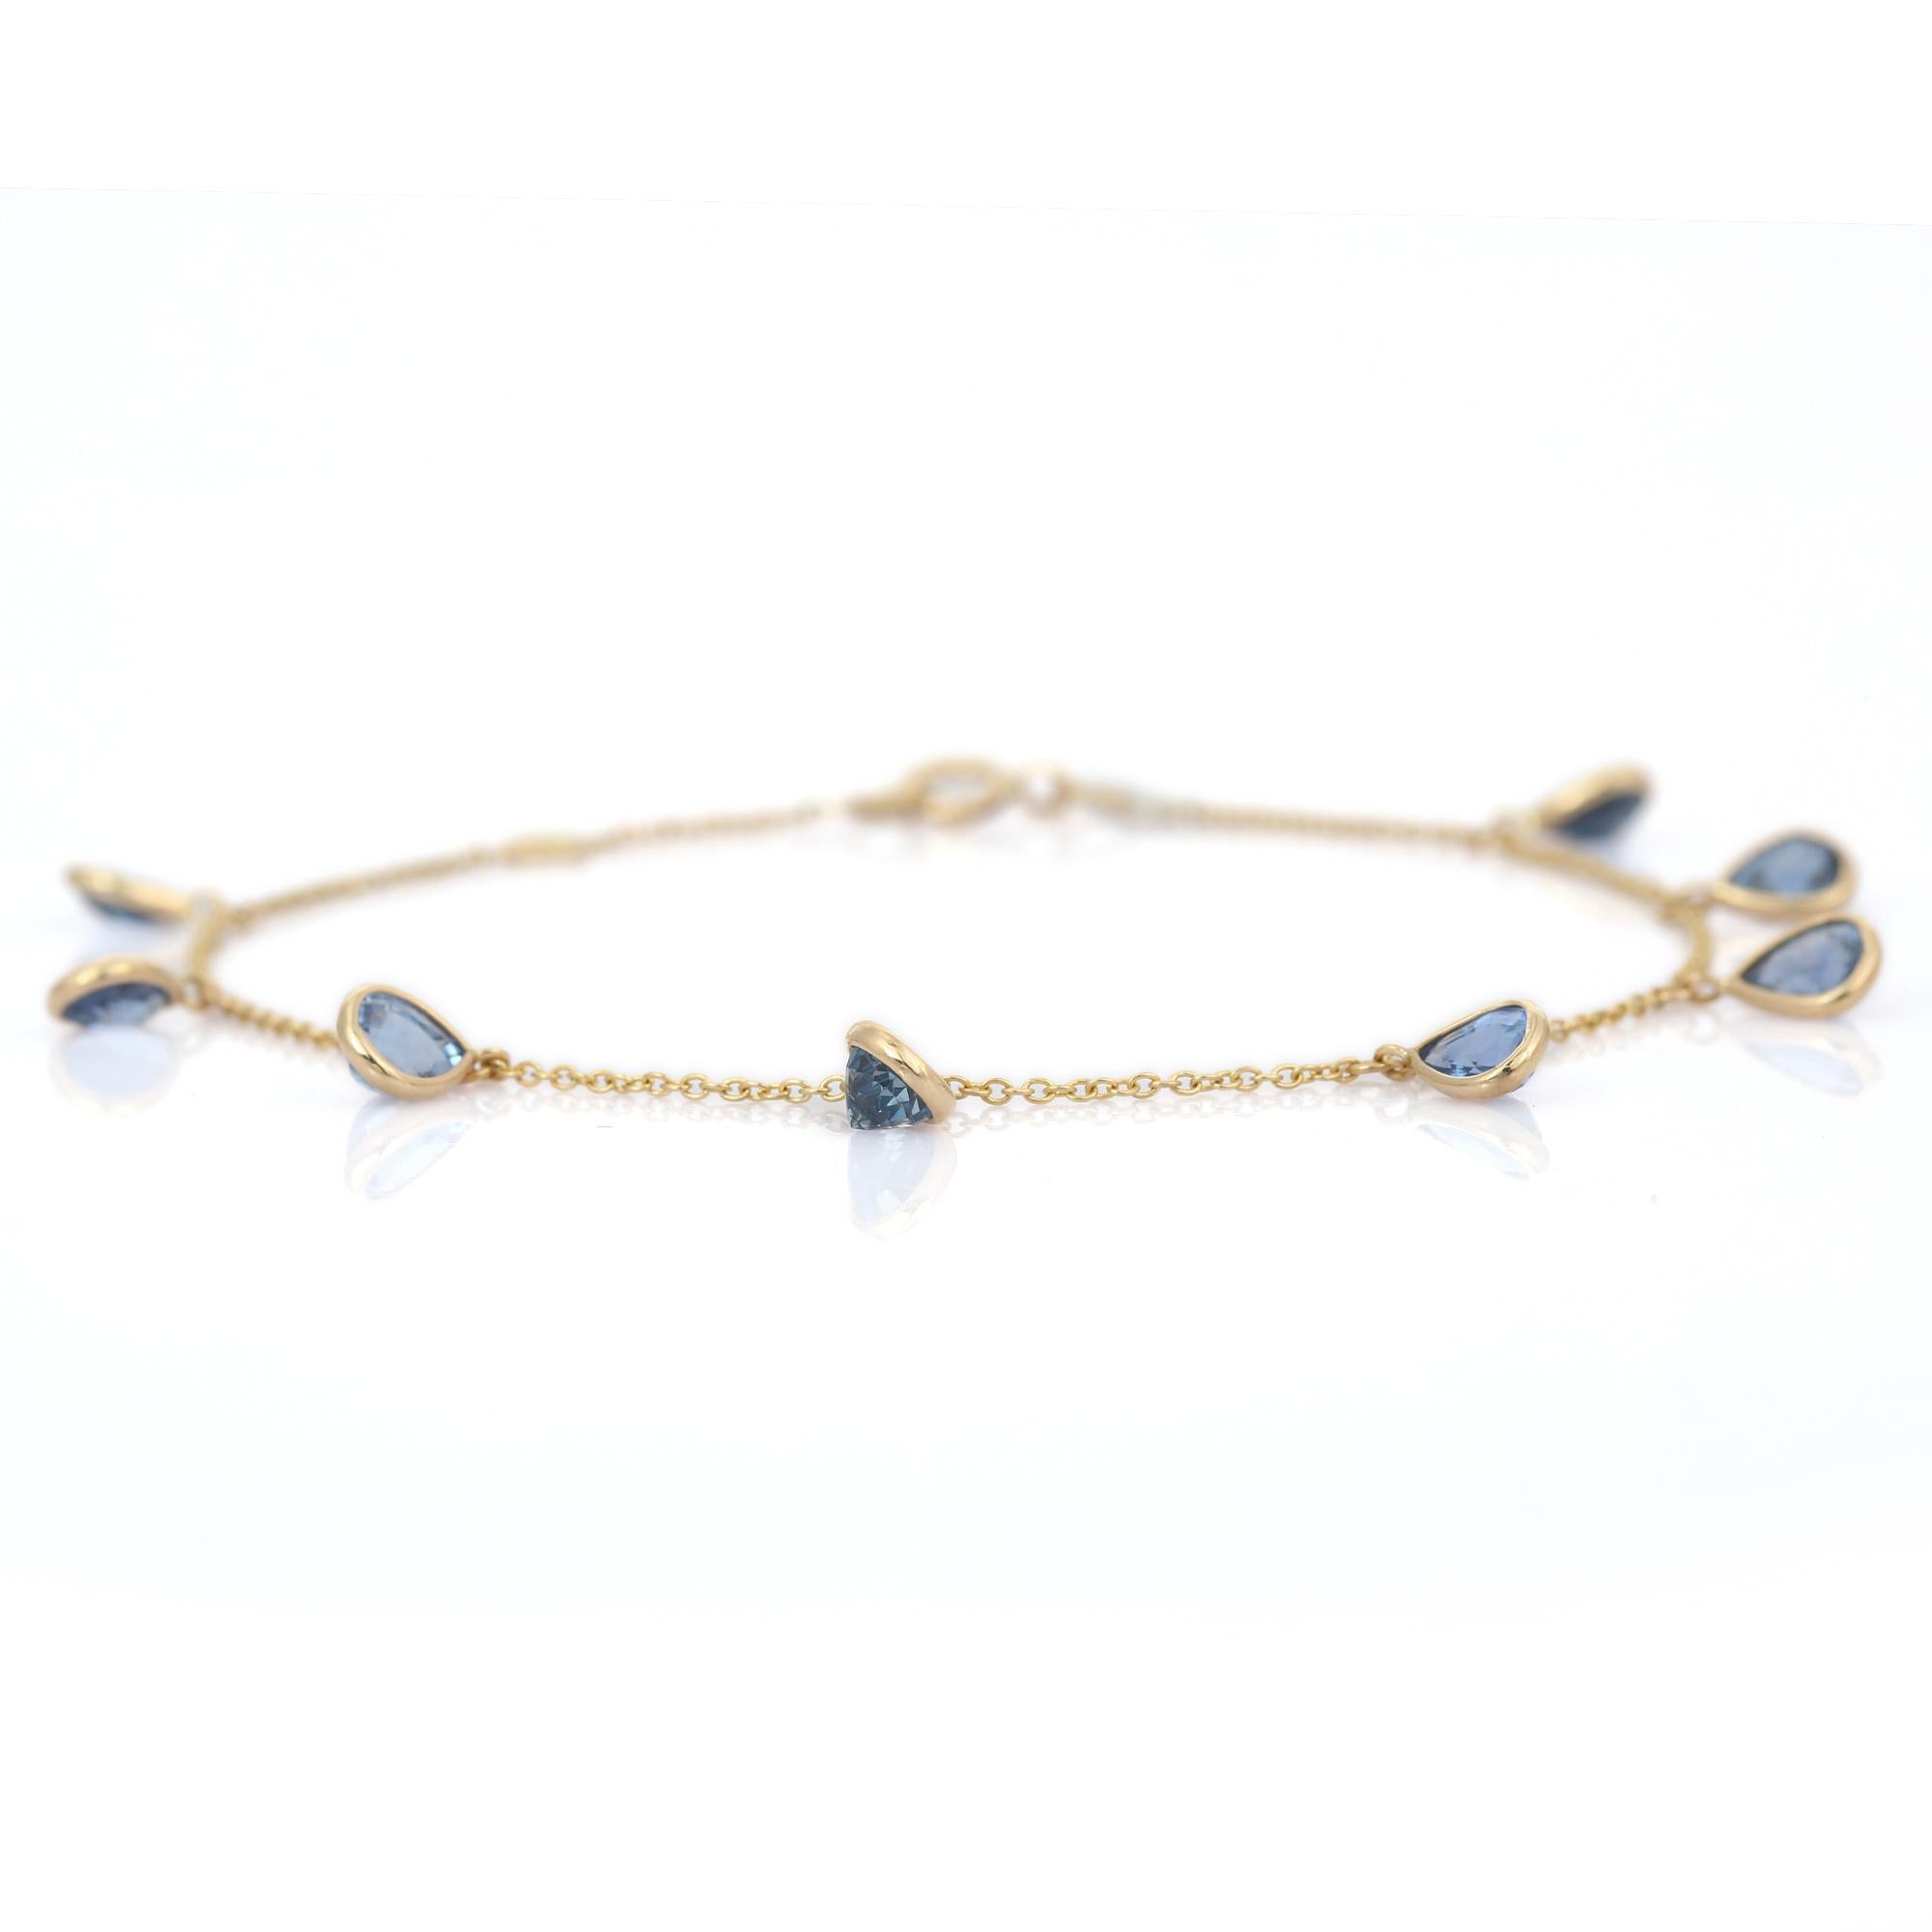 3.44 Carat Blue Sapphire Chain Bracelet in 18K Yellow Gold In New Condition For Sale In Houston, TX